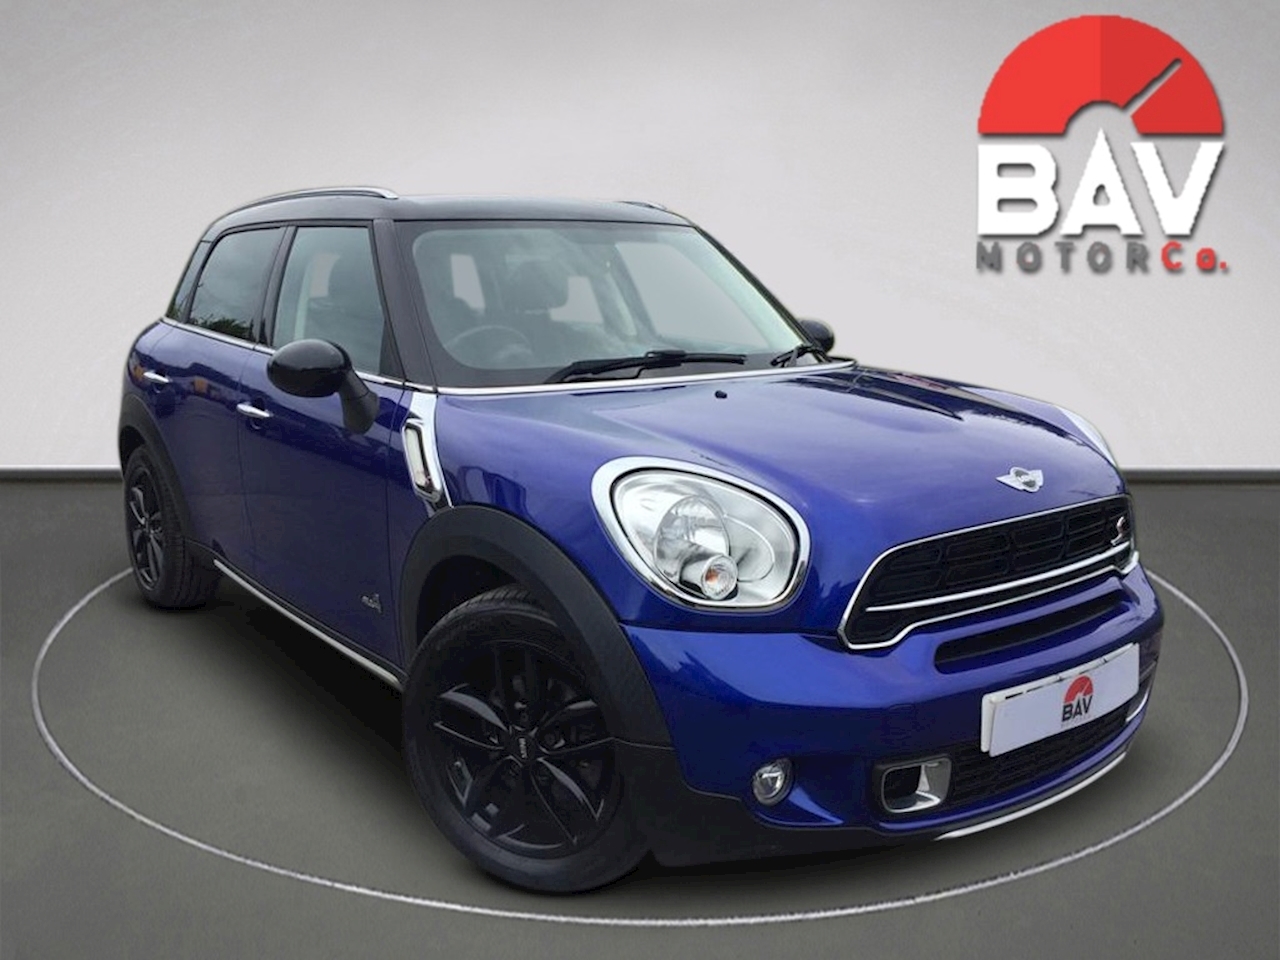 2.0 Cooper SD SUV 5dr Diesel Automatic ALL4 (160 g/km, 143 bhp)